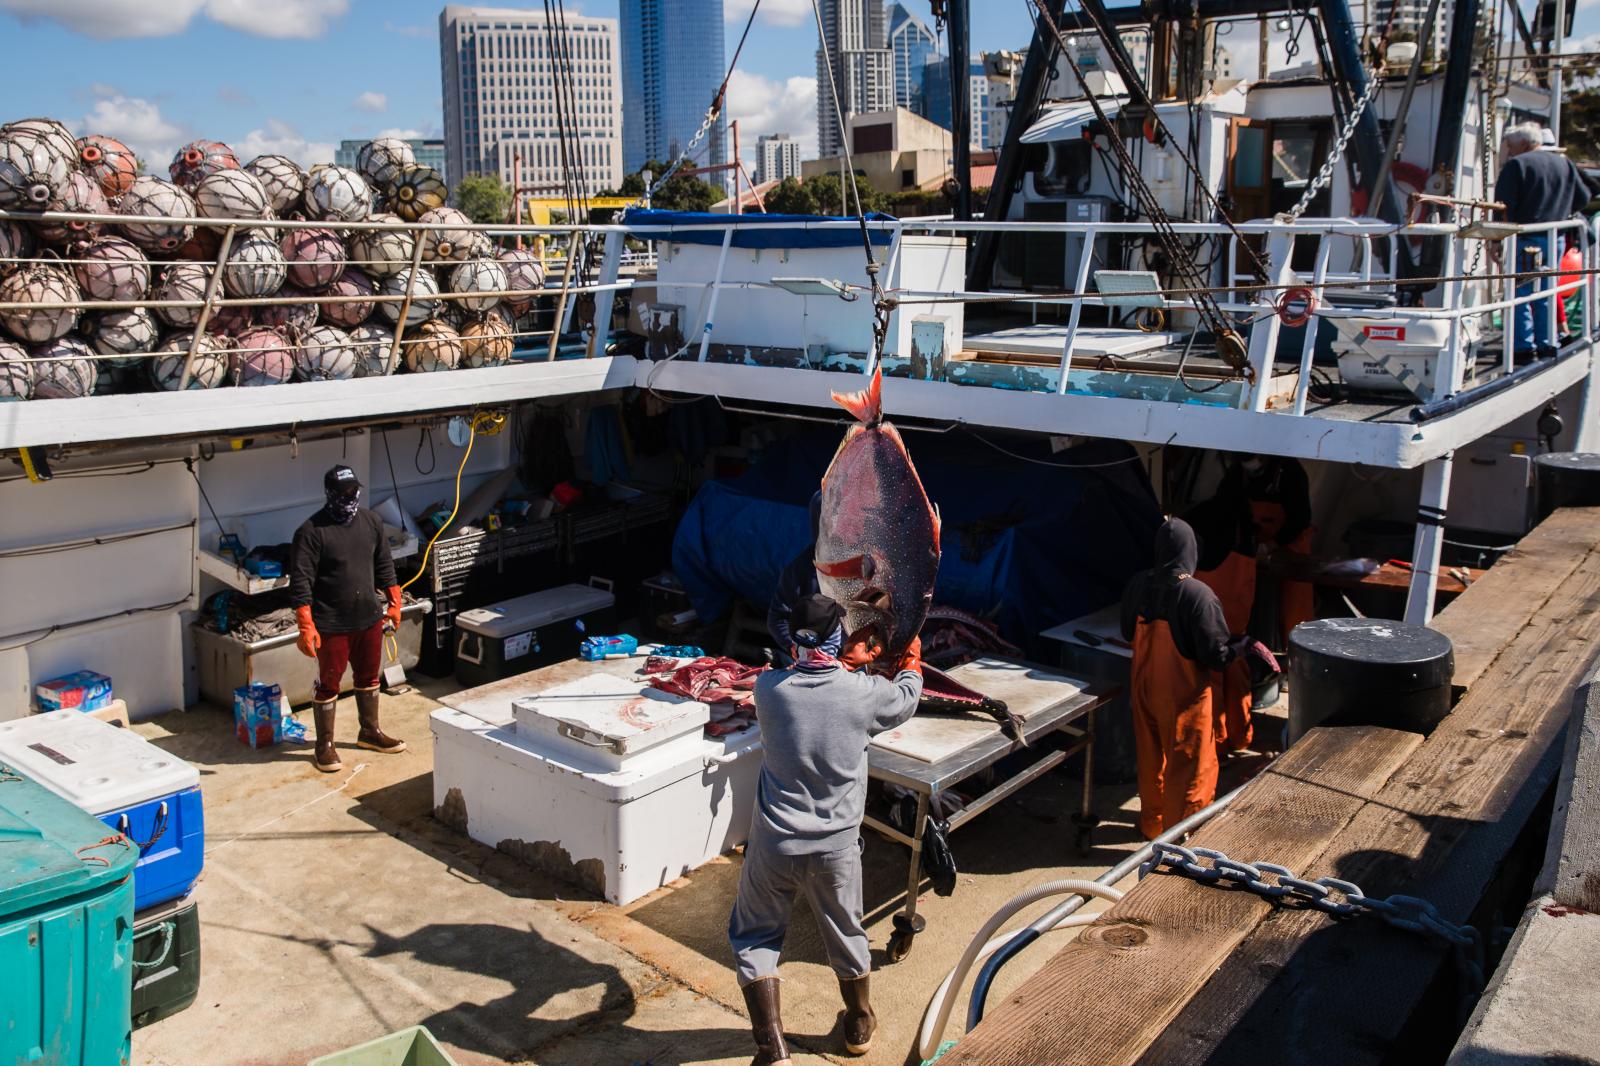 A fisherman gets ready to cut fish on the Pacific Horizon fishing Boat (owned by the Haworth family) at the Tuna Harbor Dockside Market on April 11, 2020 in San Diego, California. Fisherman have had to regroup due to Covid-19. Since local restaurants have been shut down and not every establishment is doing take-out or deliveries, they have to had to lower their cost for the locals who have been purchasing their fish.